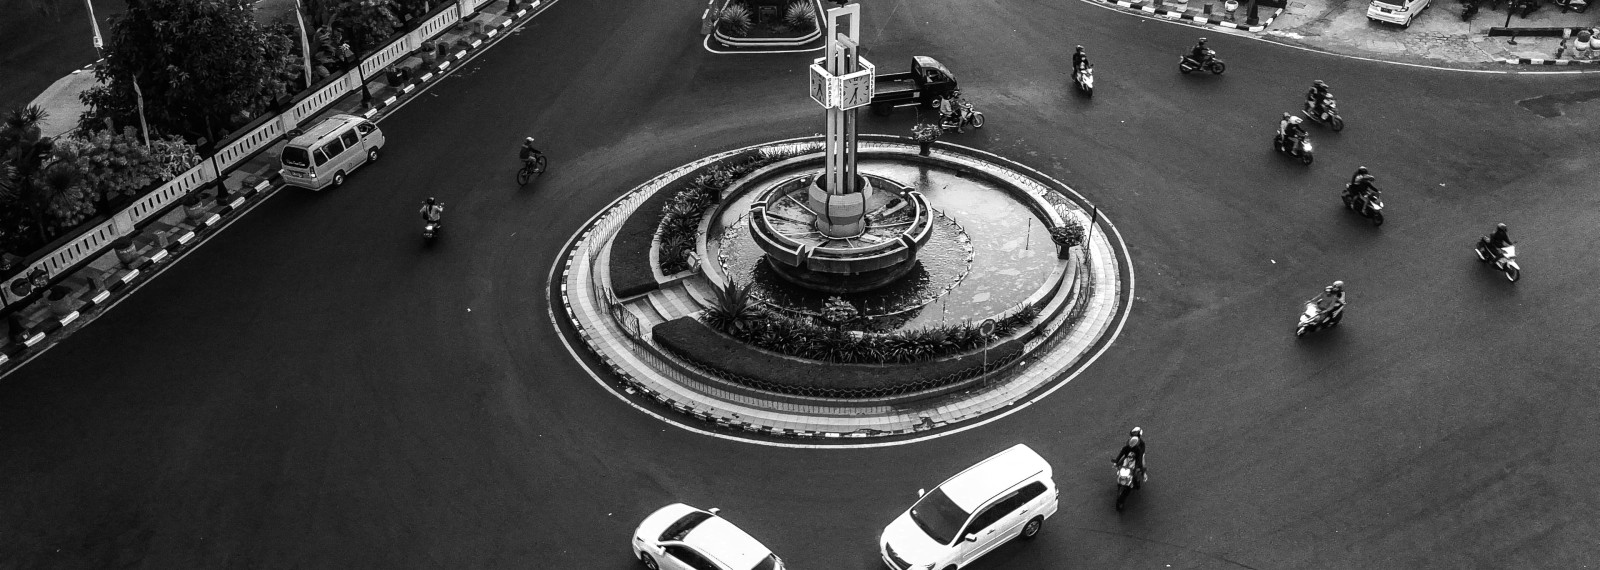 Image looking down at a roundabout with cars and cycles circling